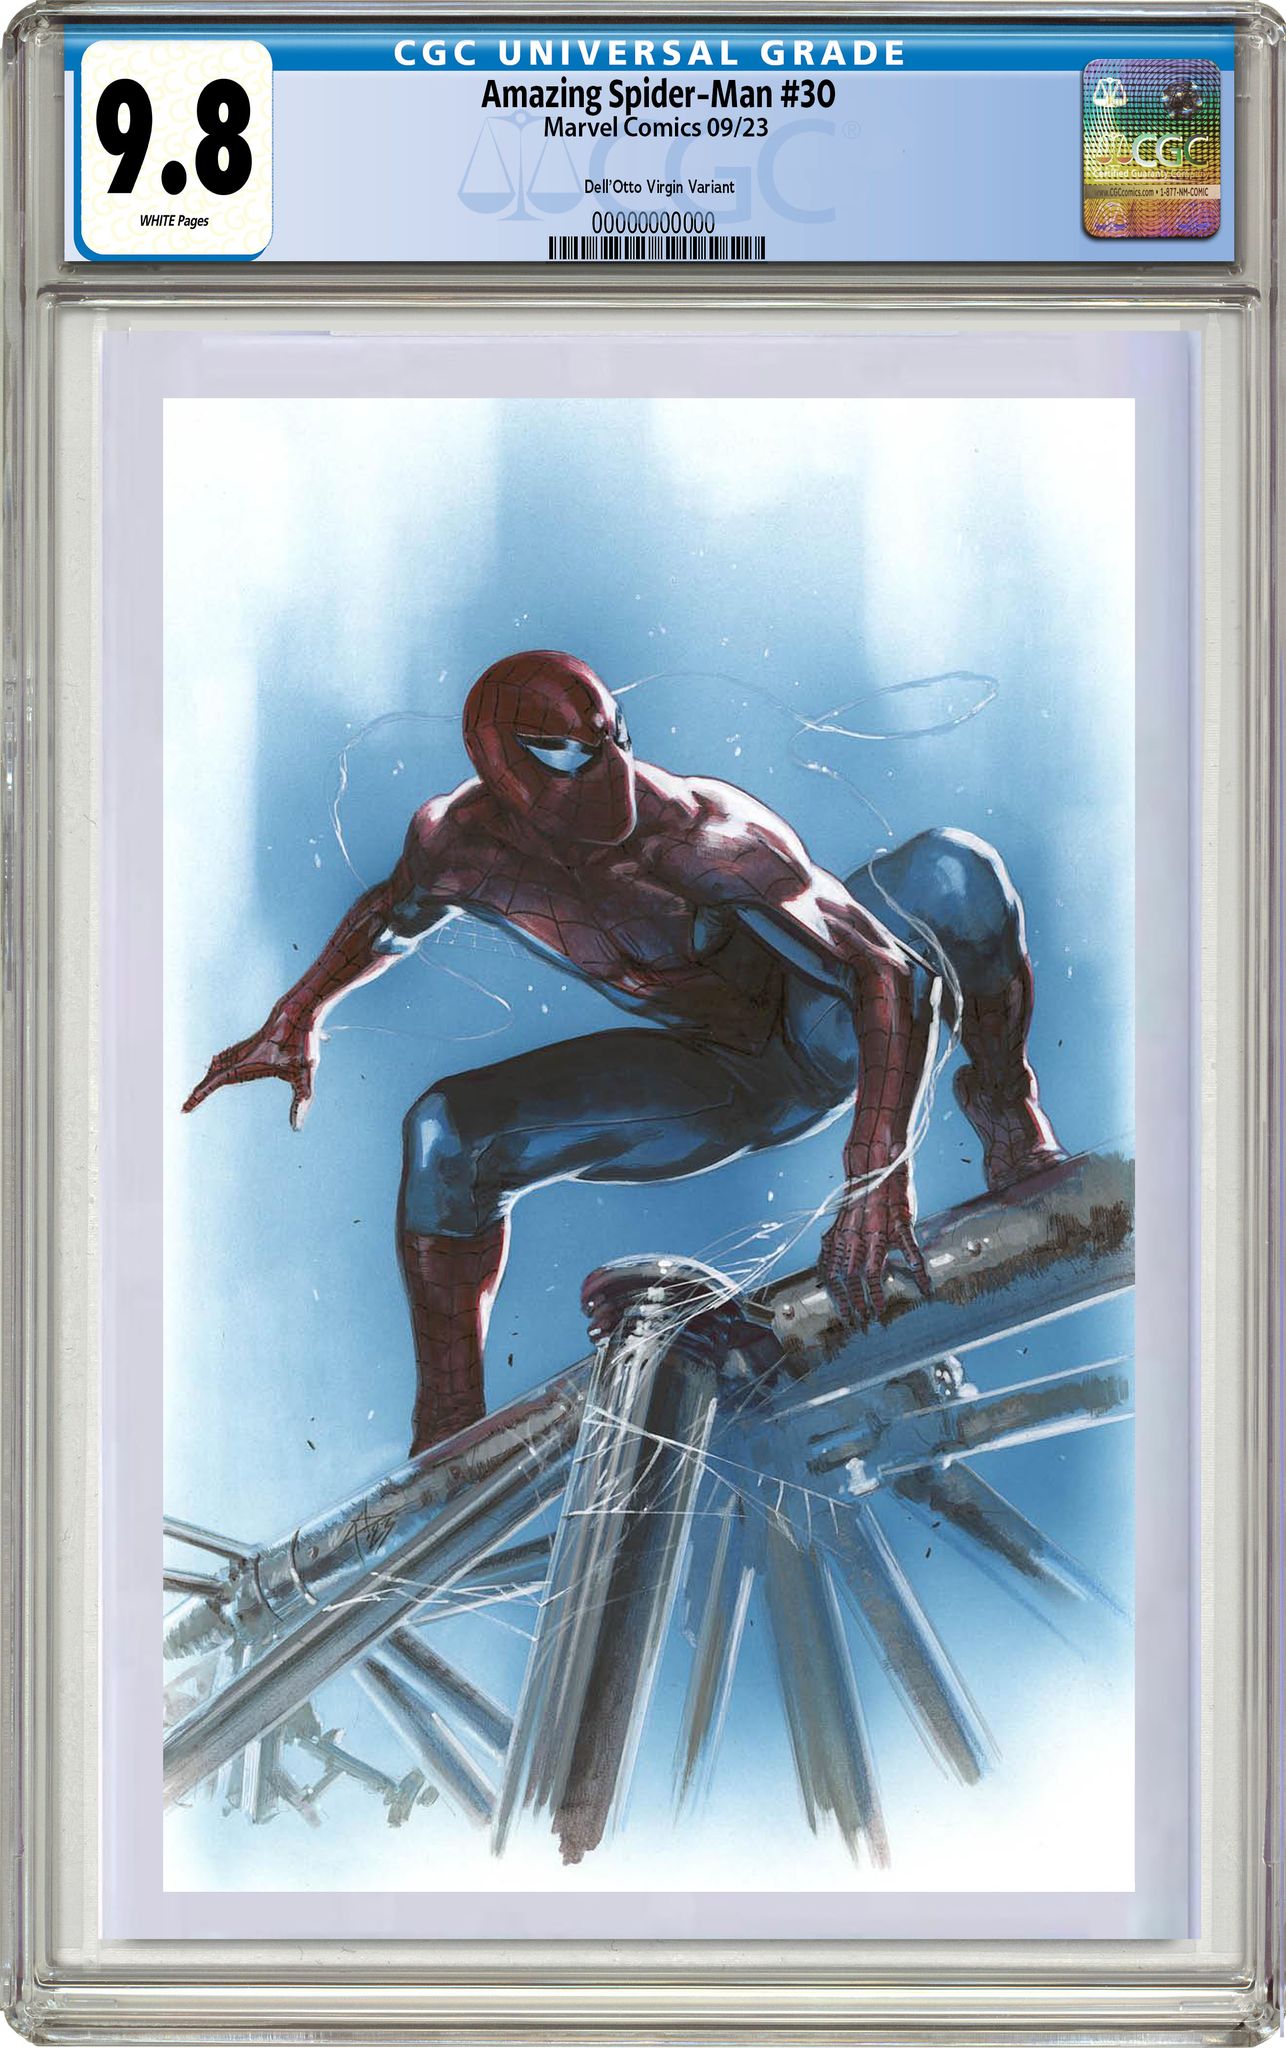 AMAZING SPIDER-MAN 30 GABRIELE DELL'OTTO EXCLUSIVE VARIANT OPTIONS - 07/26/23